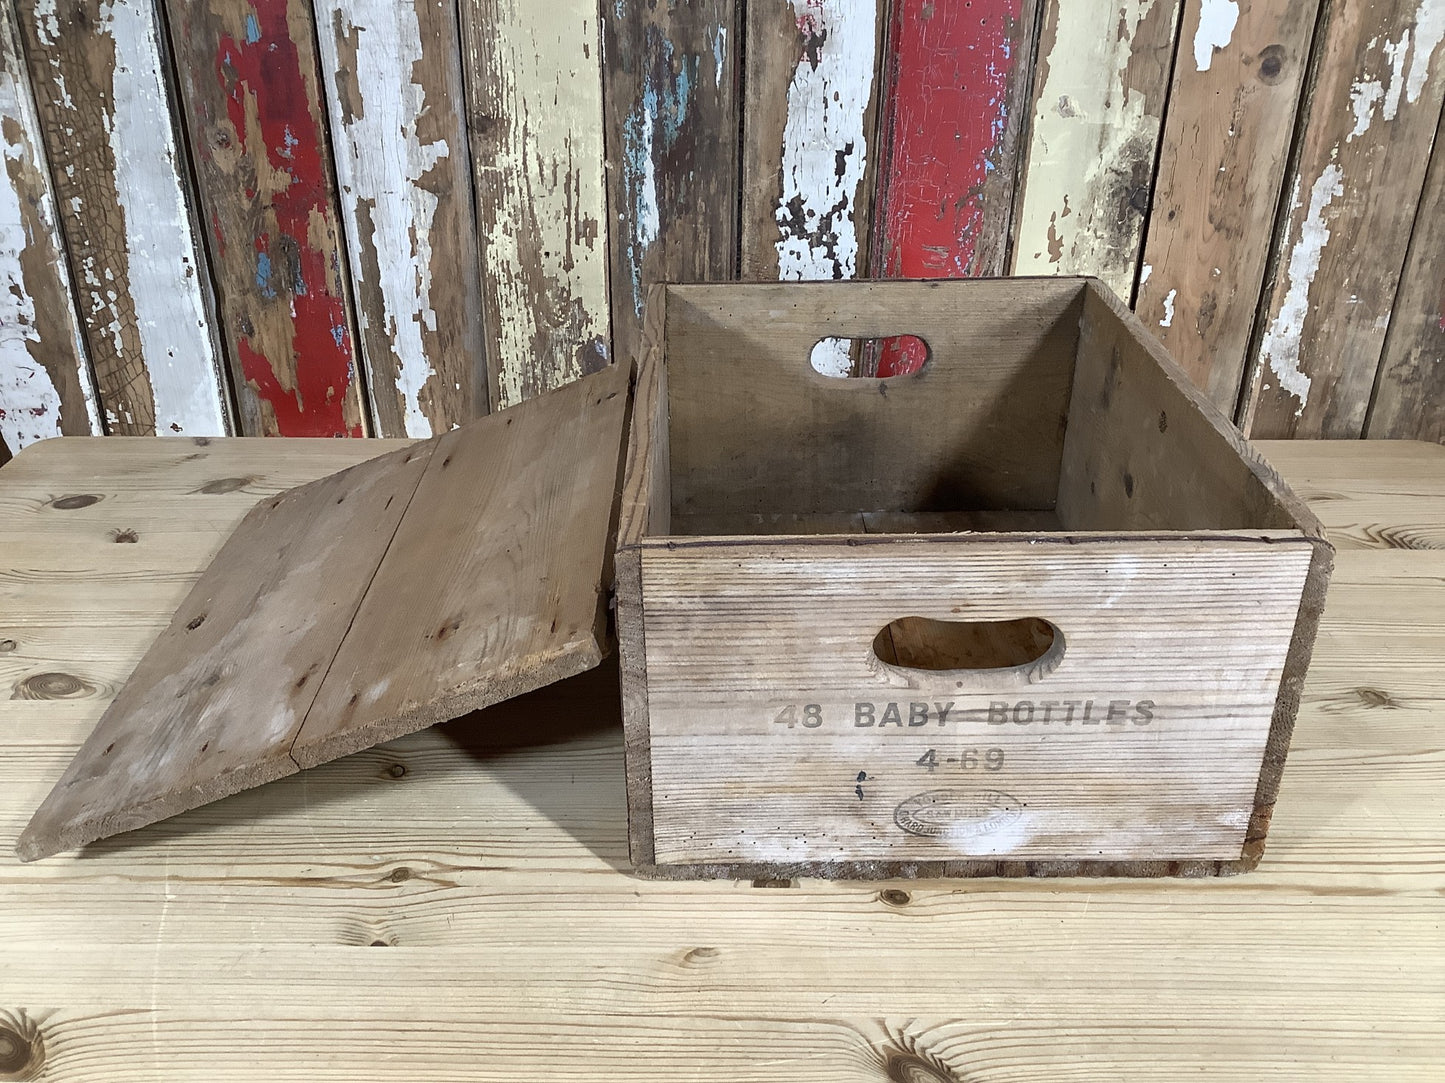 Old Quirky Rustic Small Solid Pine Box With Lid & “Baby Bottles” Text On Side